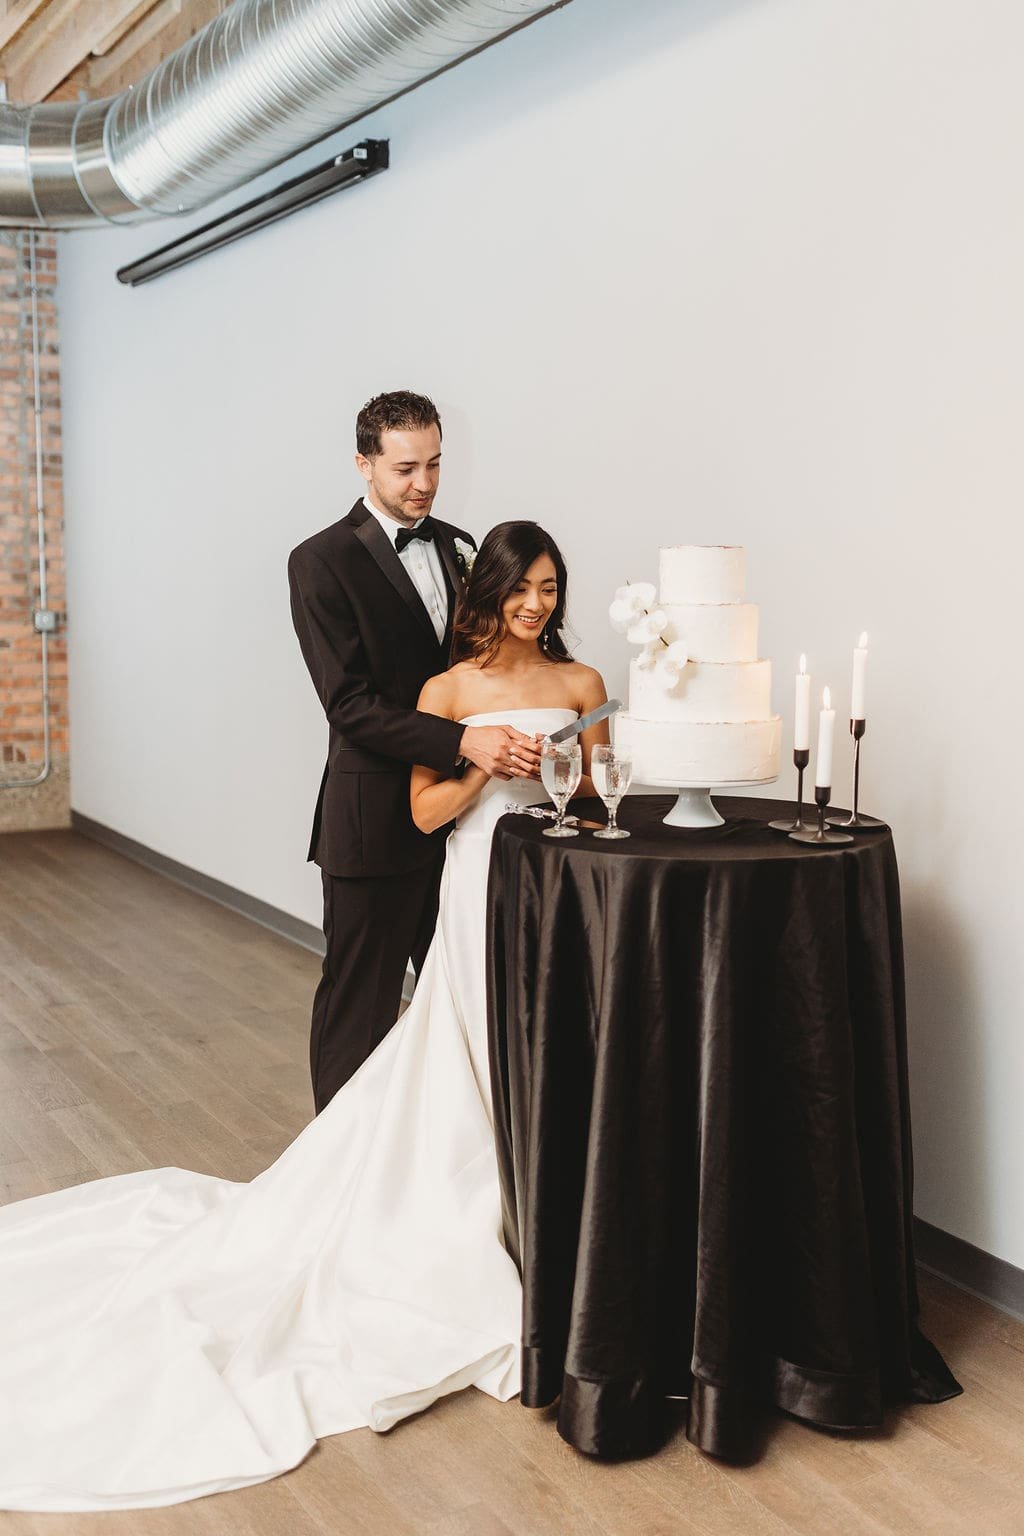 Bride and groom cutting the cake at Outreach Event Space